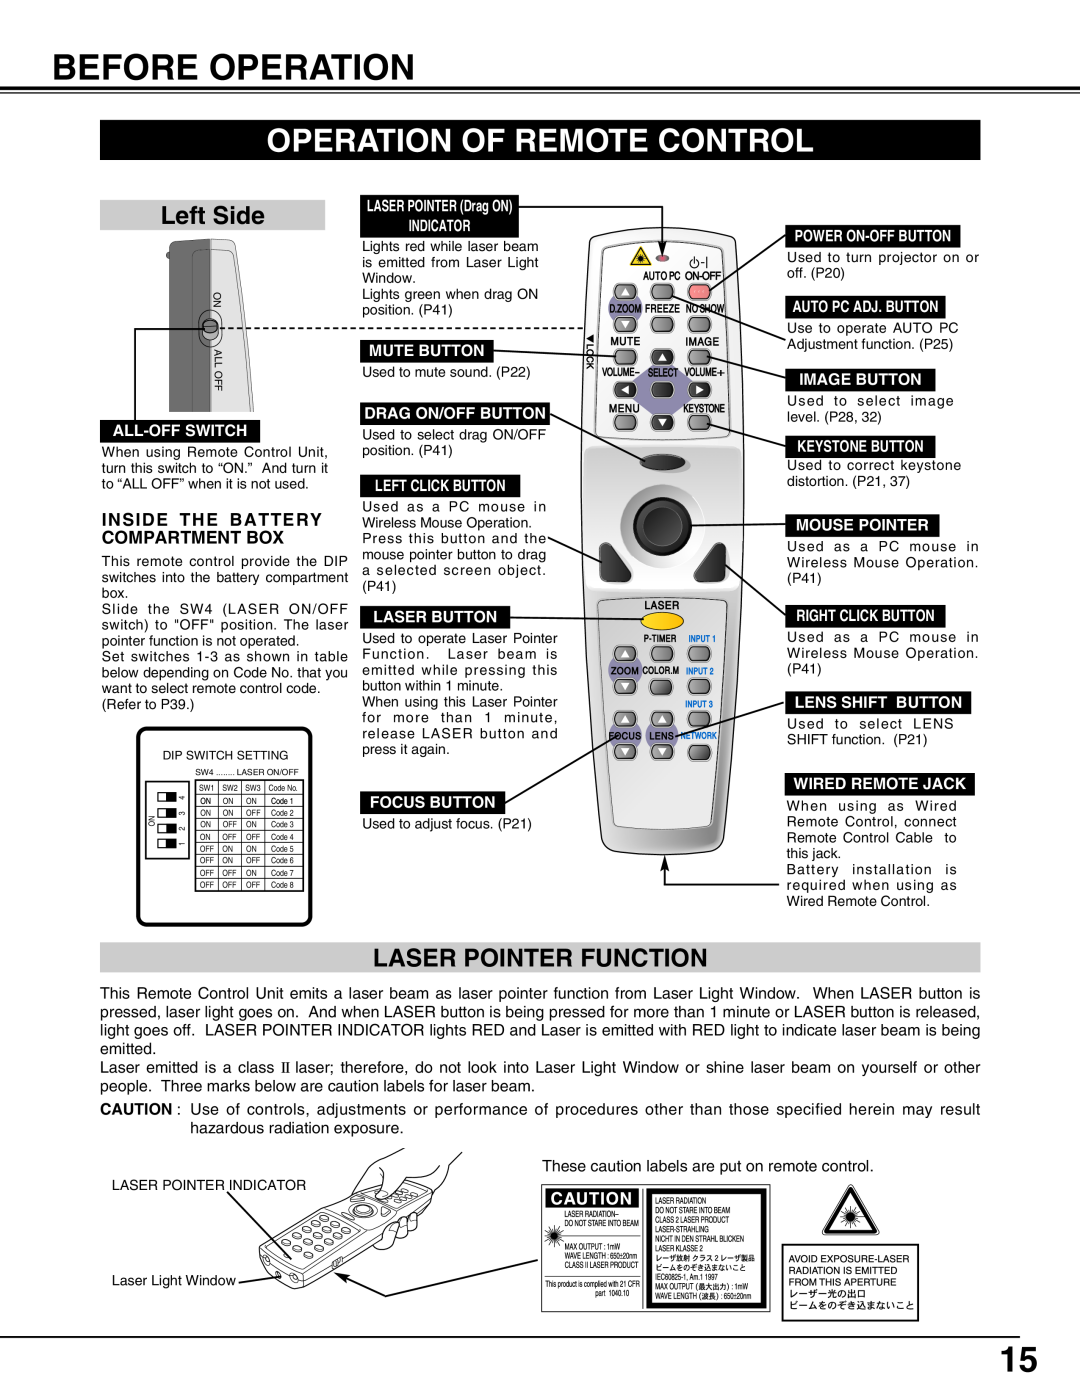 Sanyo PLC-XP50L, XP51L owner manual Before Operation, Operation Of Remote Control, Left Side, Laser Pointer Function 